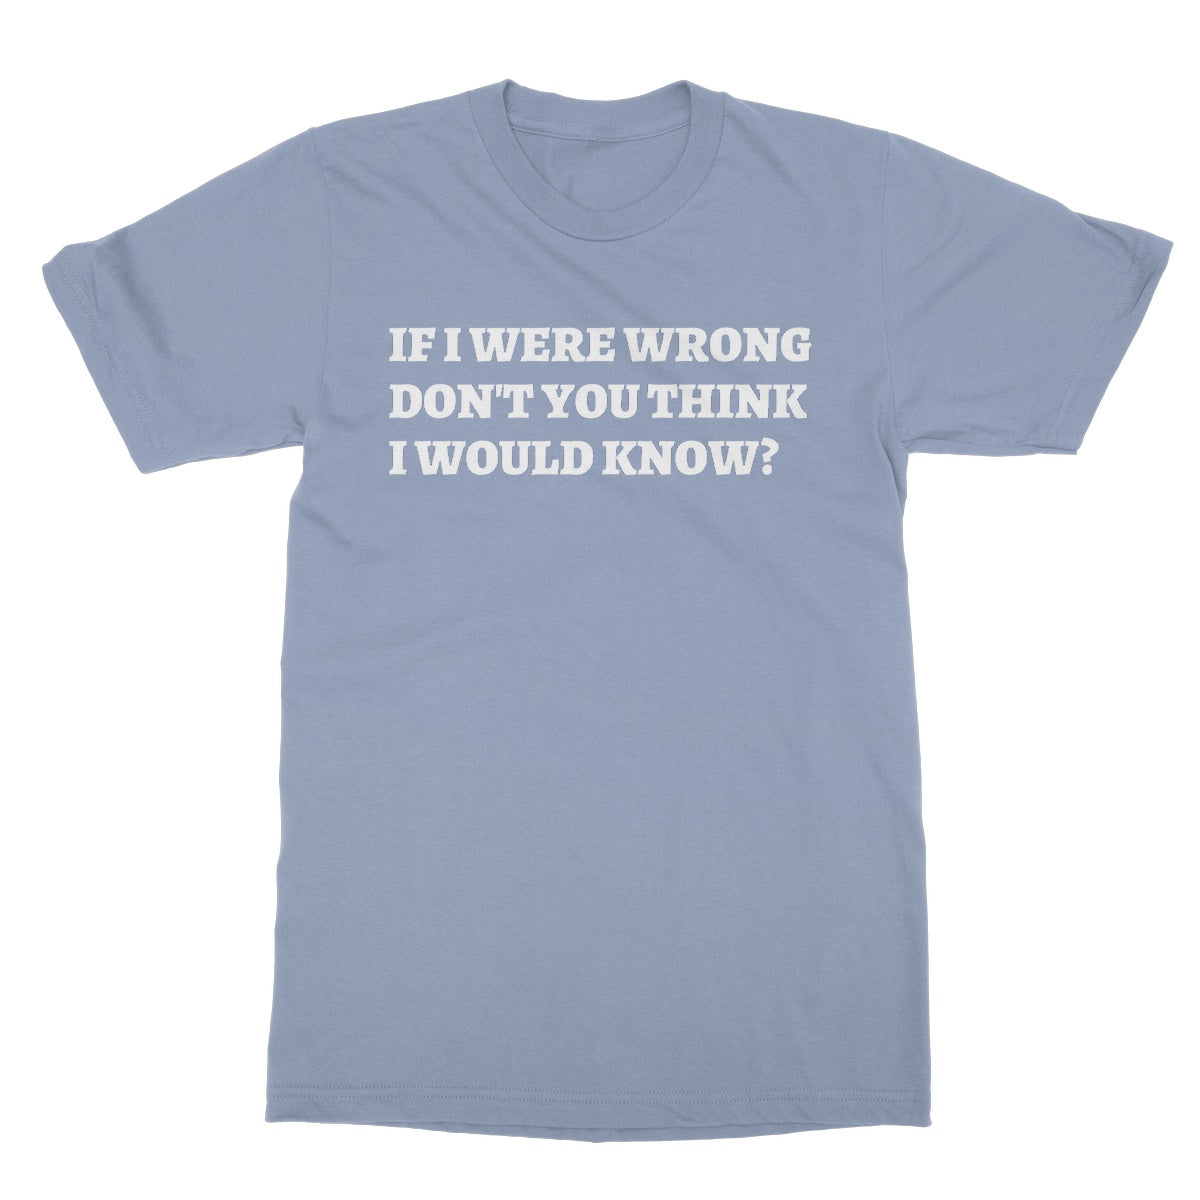 if I were wrong don't you think I would know t shirt blue